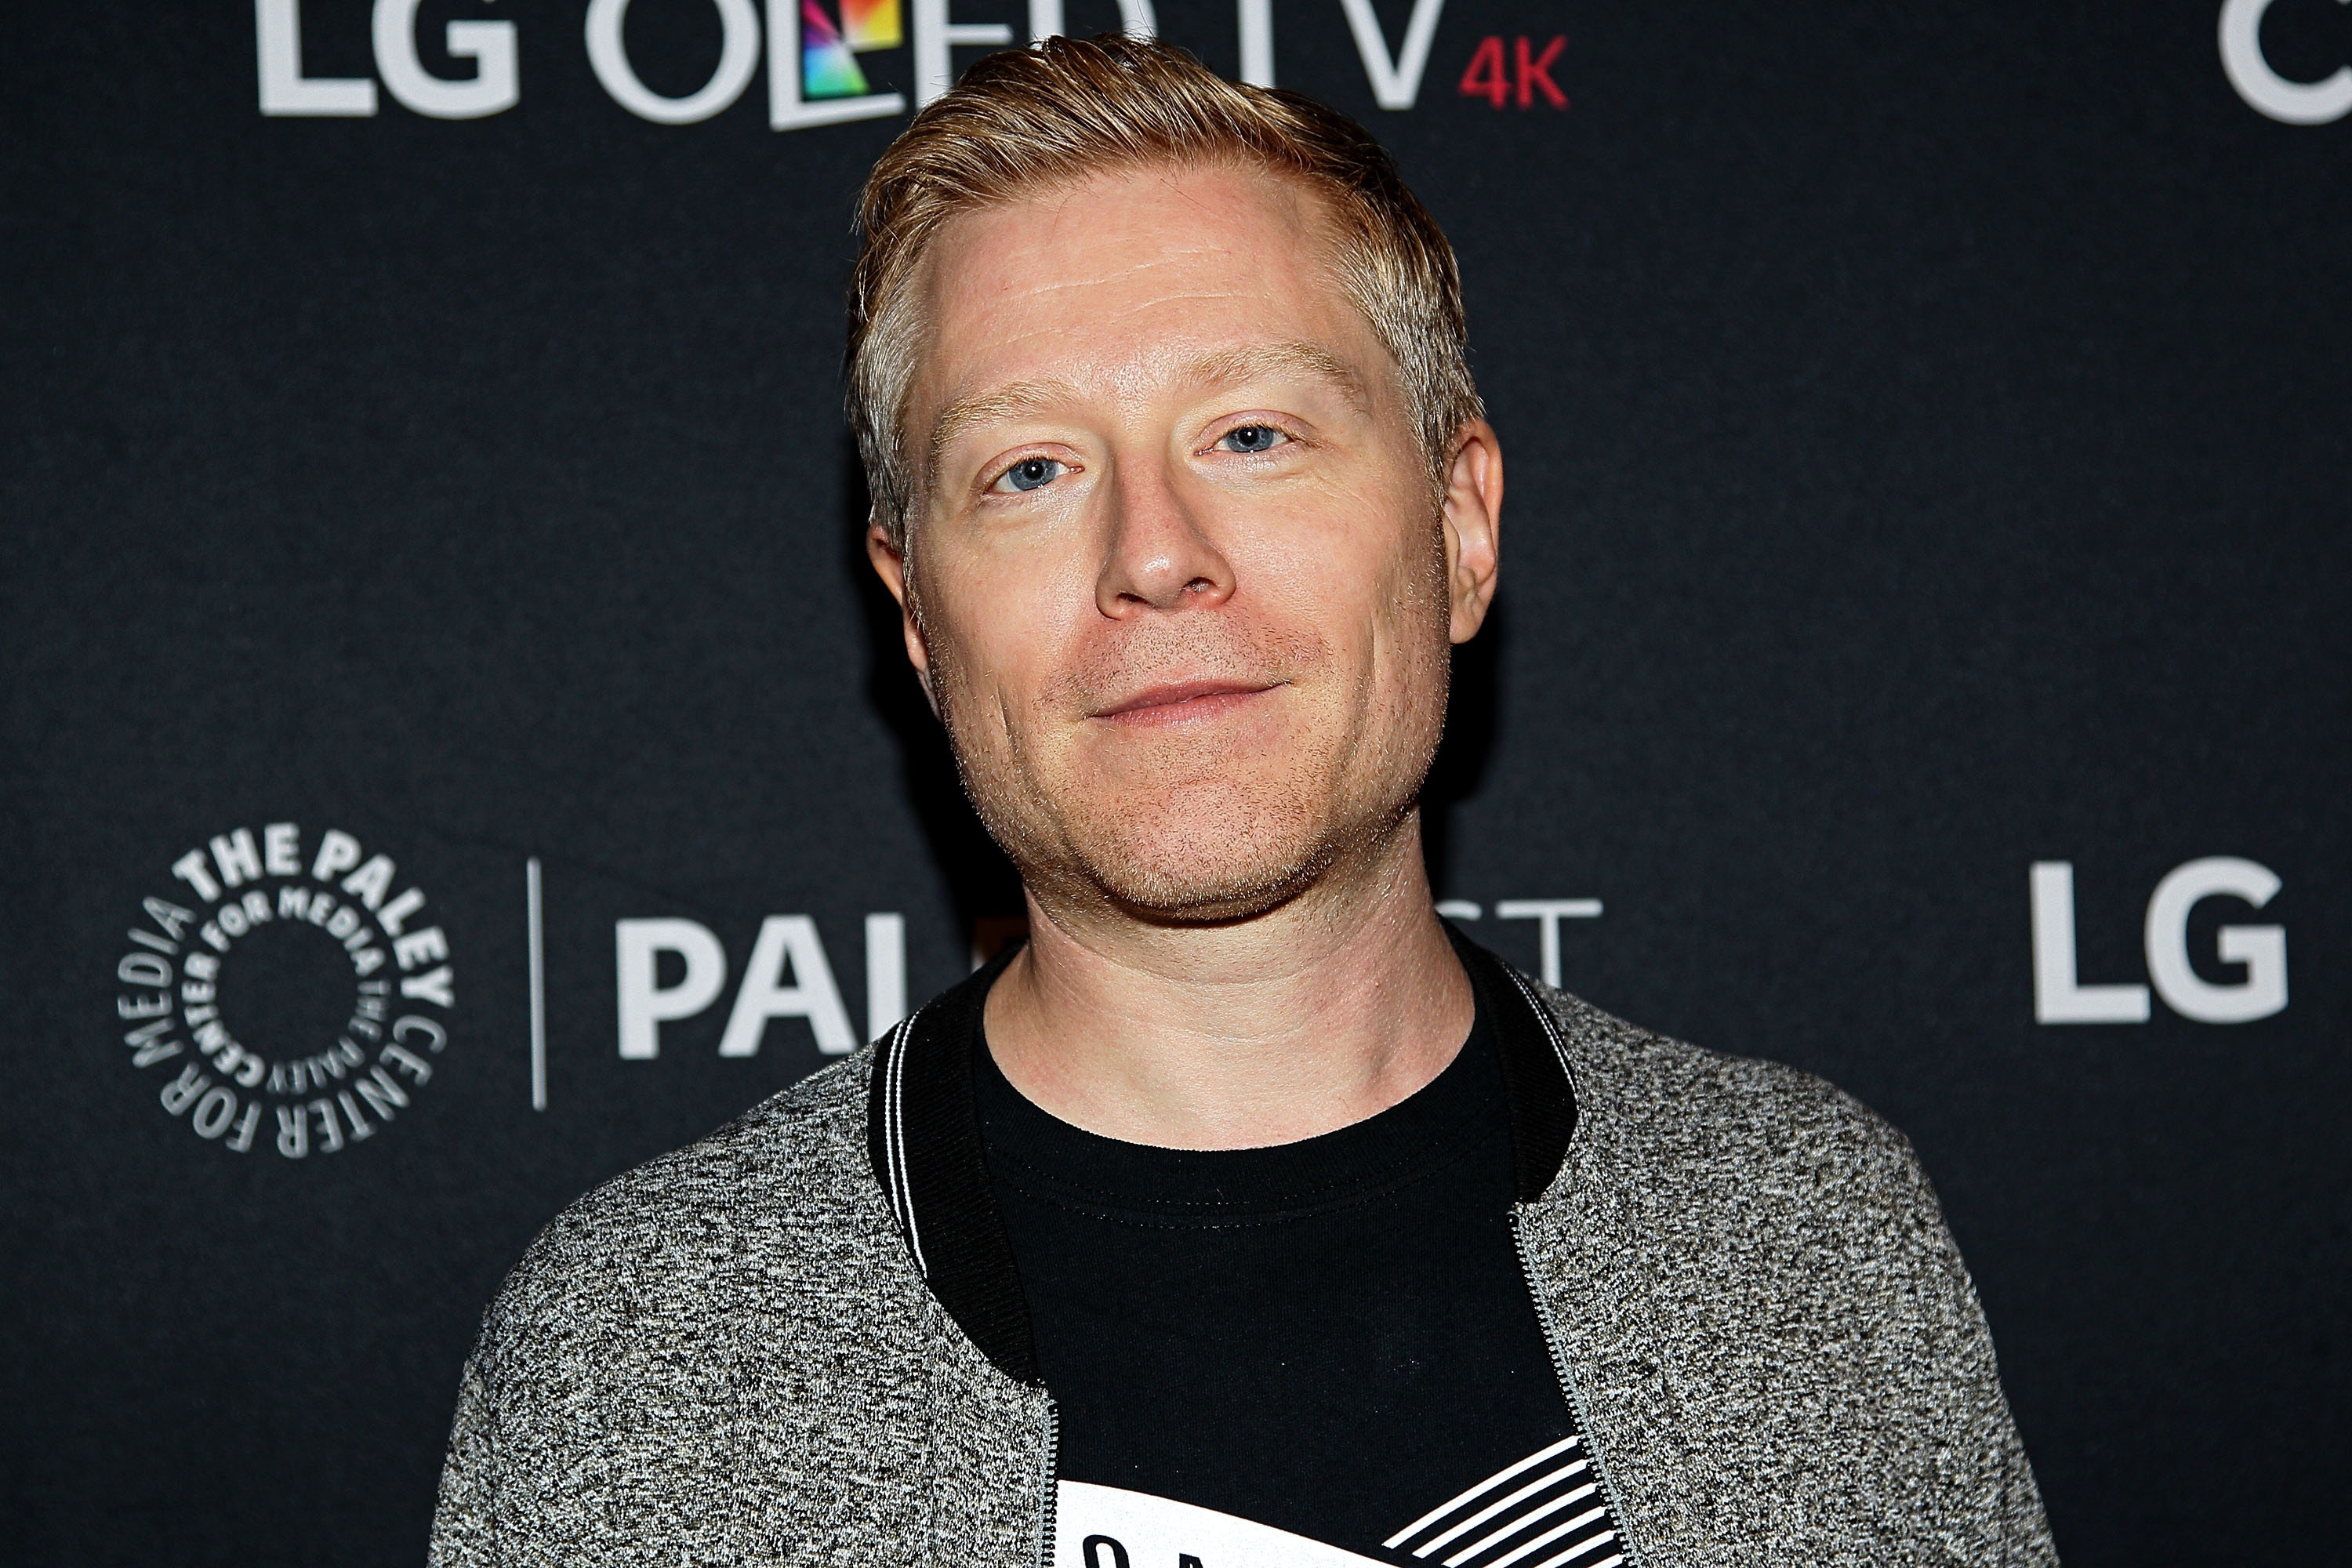 Anthony Rapp attends "Star Trek: Discovery" during the PaleyFest NY 2017 at The Paley Center for Media on October 7, 2017 in New York City. (Steve Mac—WireImage)